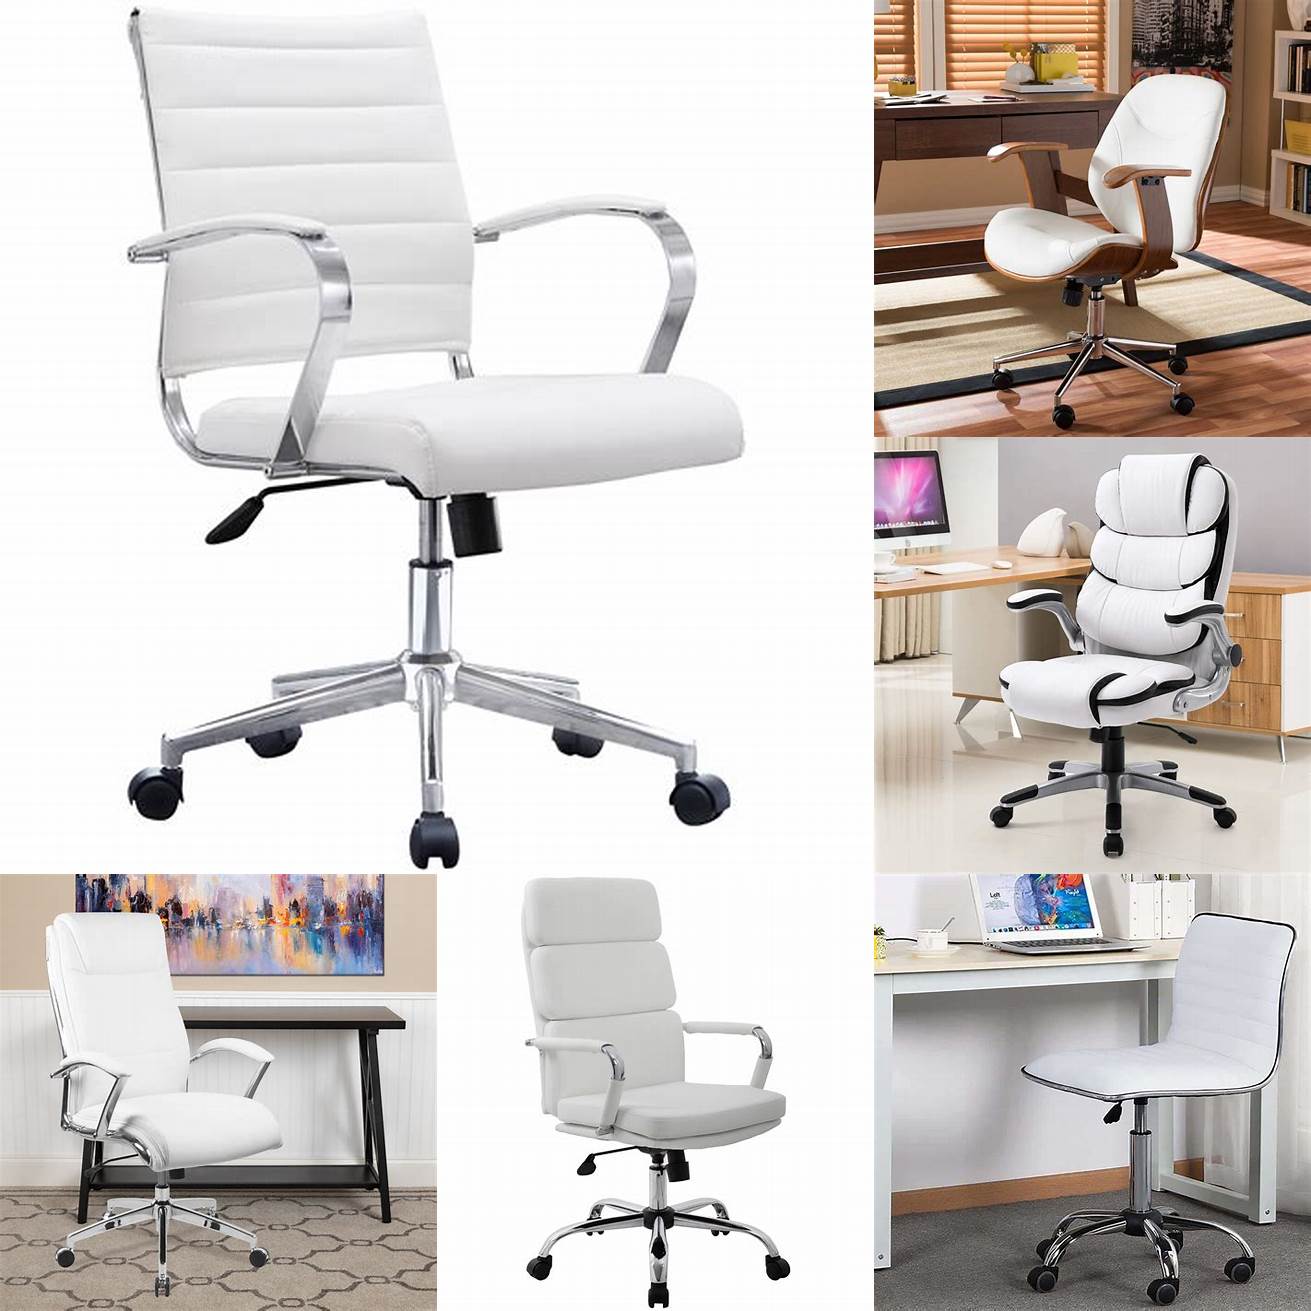 White Leather Office Chair in a modern office